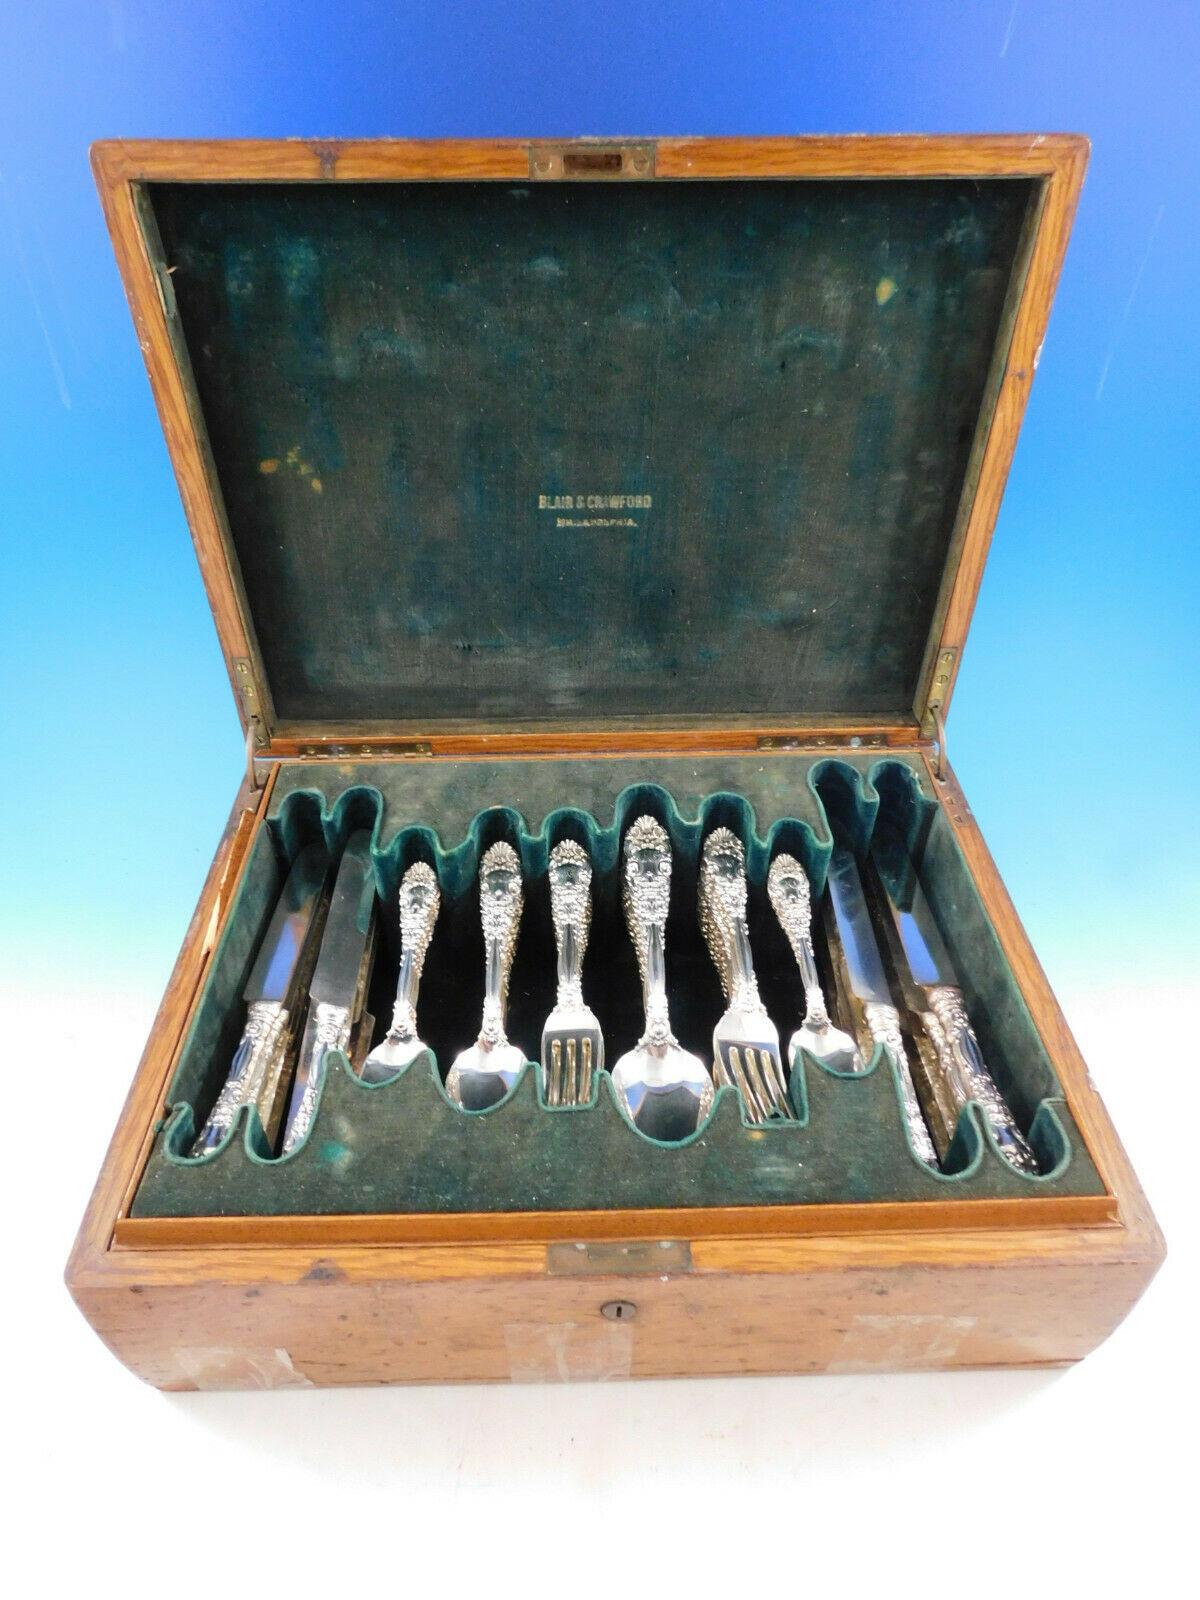 Exceptional Renaissance by Dominick and Haff flatware set, 84 pieces. This scarce figural pattern features a Renaissance Man's face on the handle and on the back of the soon bowl - in fine detail. This set includes:

12 Dinner Size Knives, 9